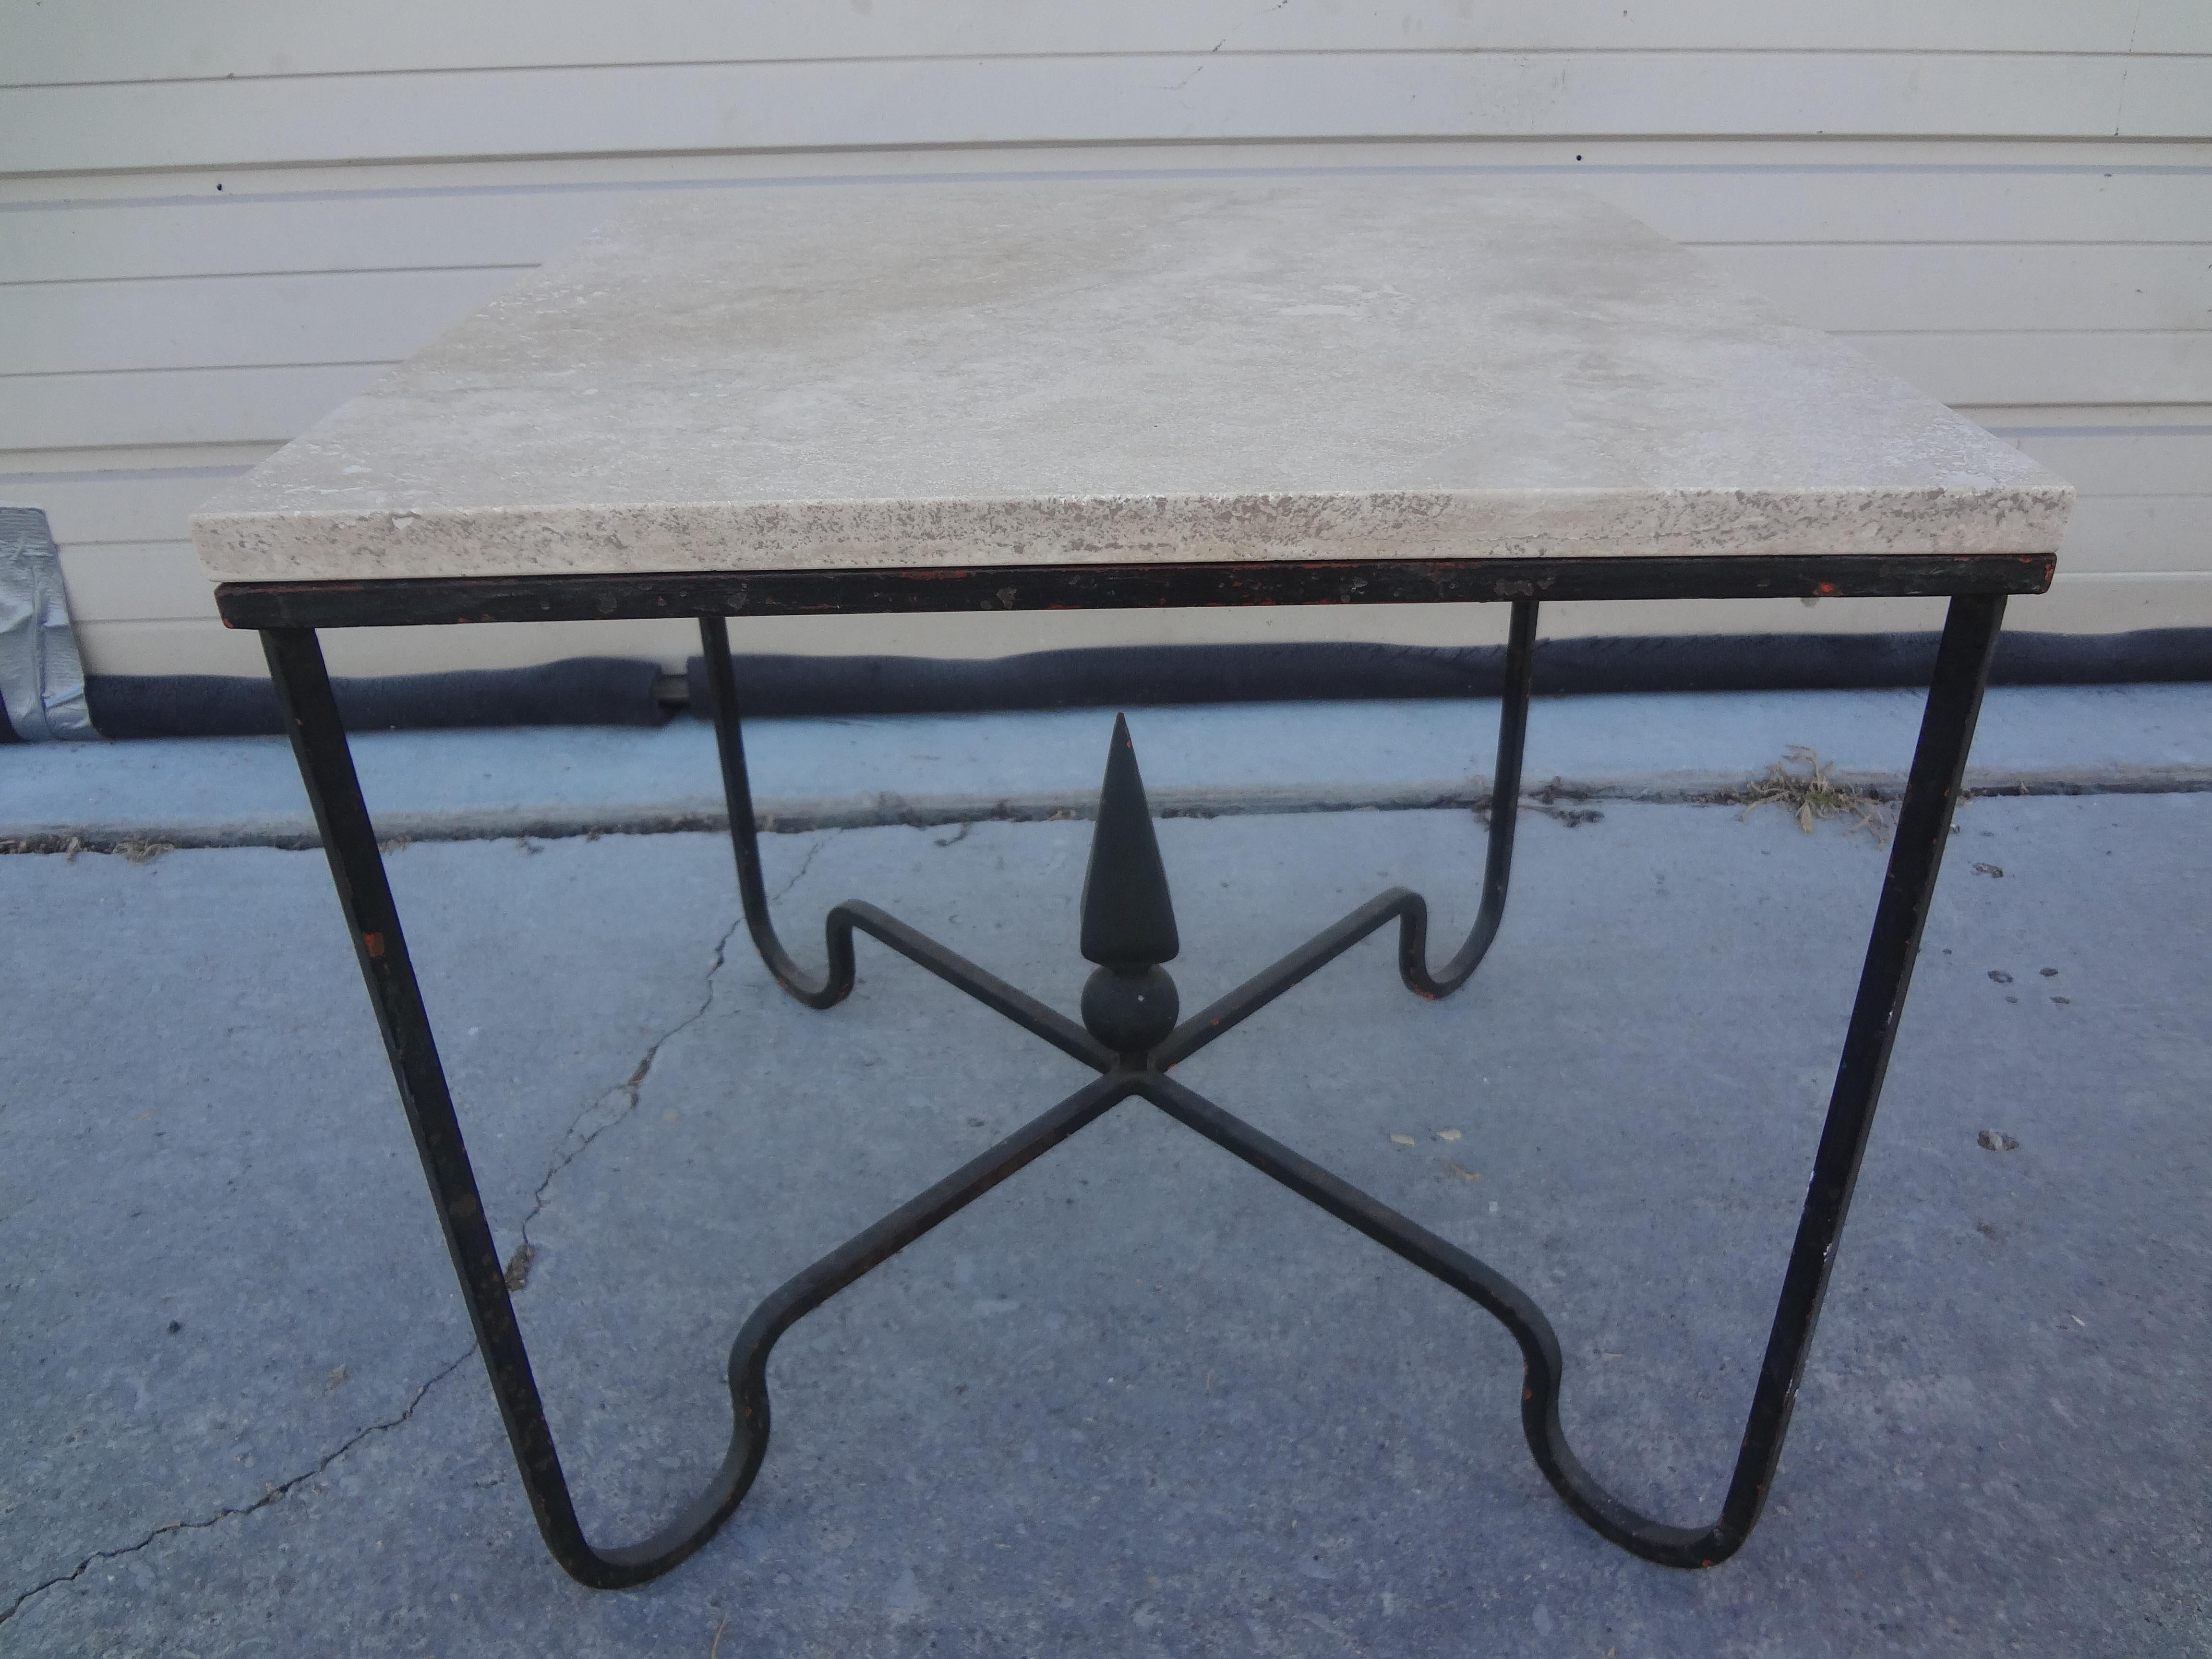 French wrought iron table with travertine top. This handsome French hand forged wrought iron table or side table has a beautiful travertine top and can be
placed in any decor.